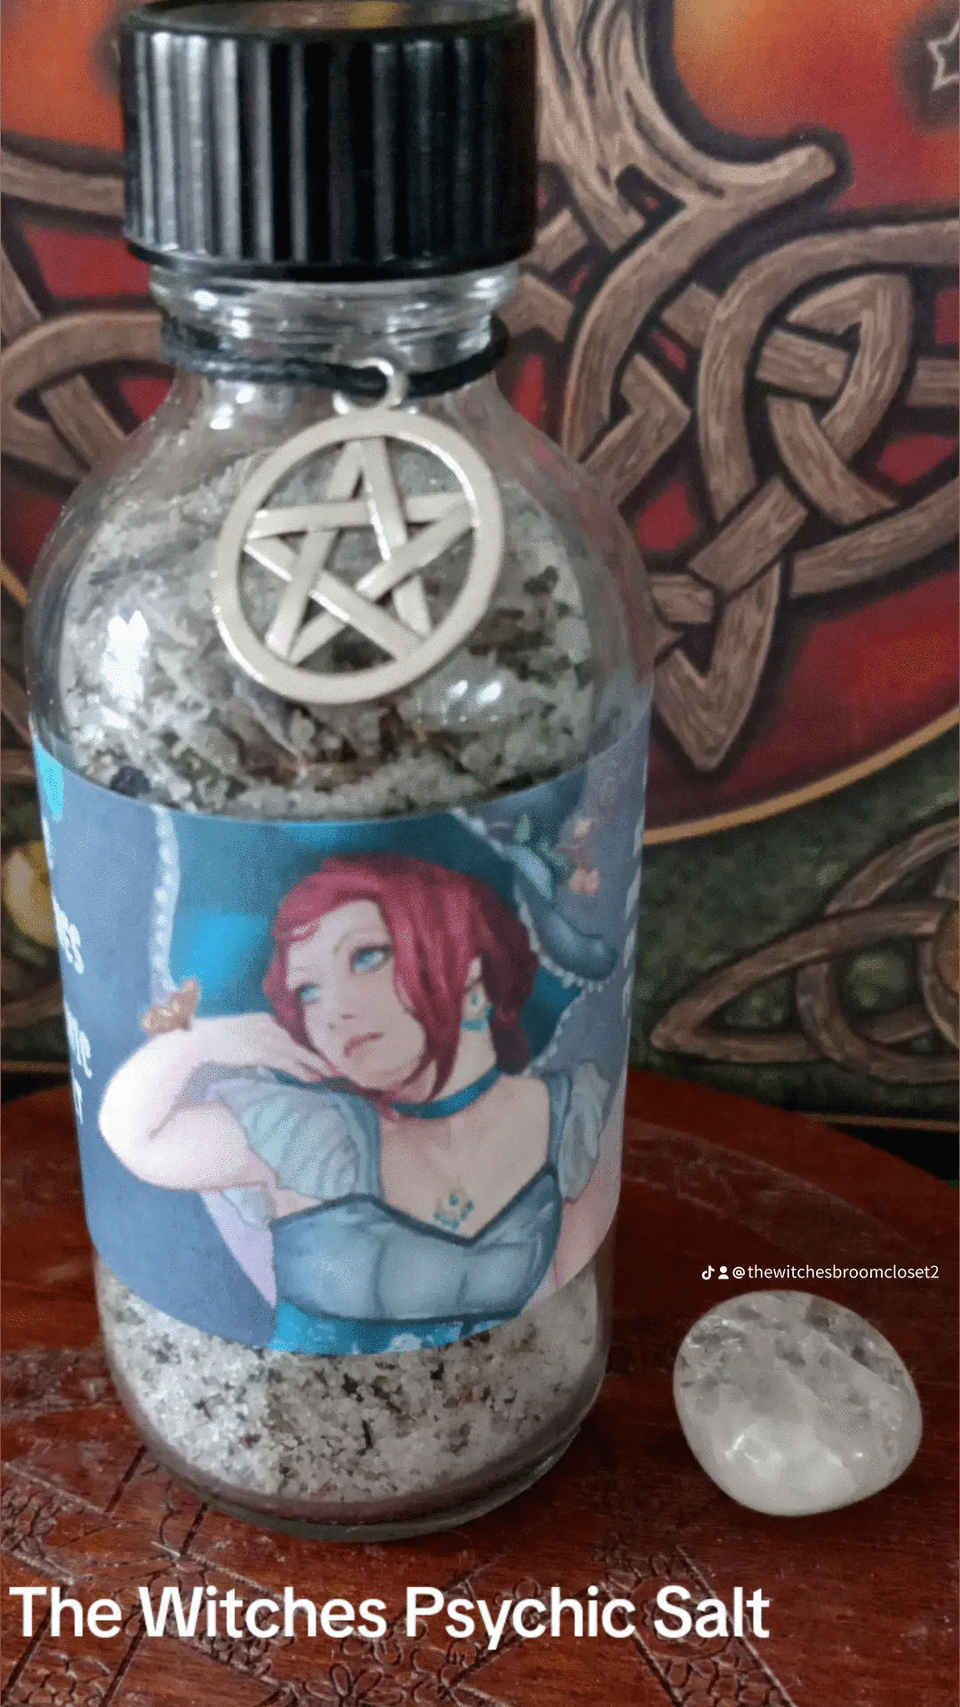 The Witches Psychic Salt